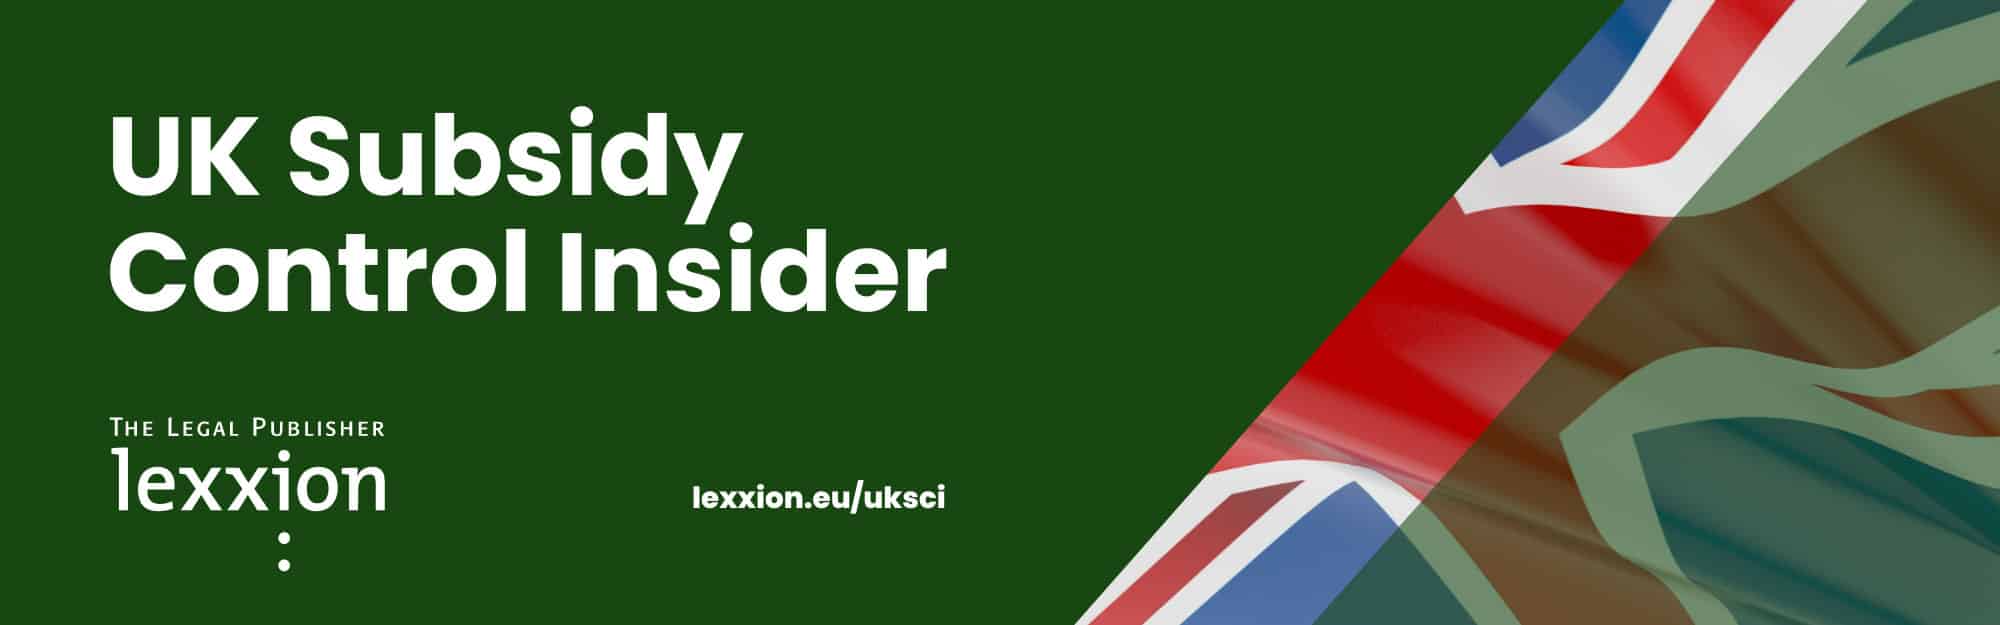 Announcing the Subsidy Control Insider and Sneak Peek of the First Edition - UK Subsidy Control Insider